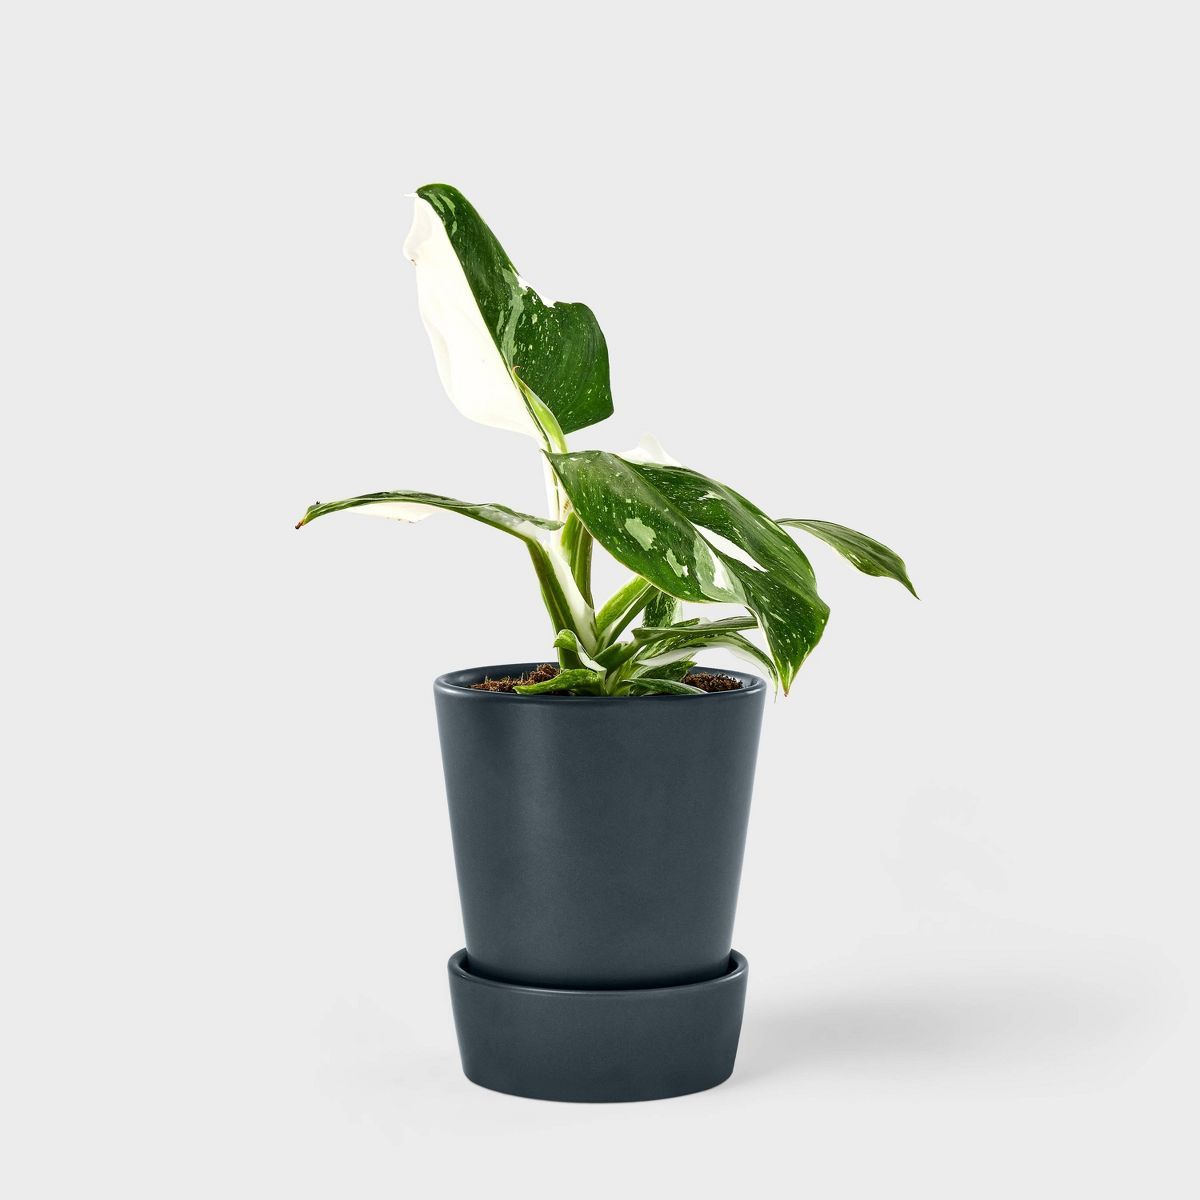 Hilton Carter for Target Live 5" White Wizard Philodendron Houseplant | Target